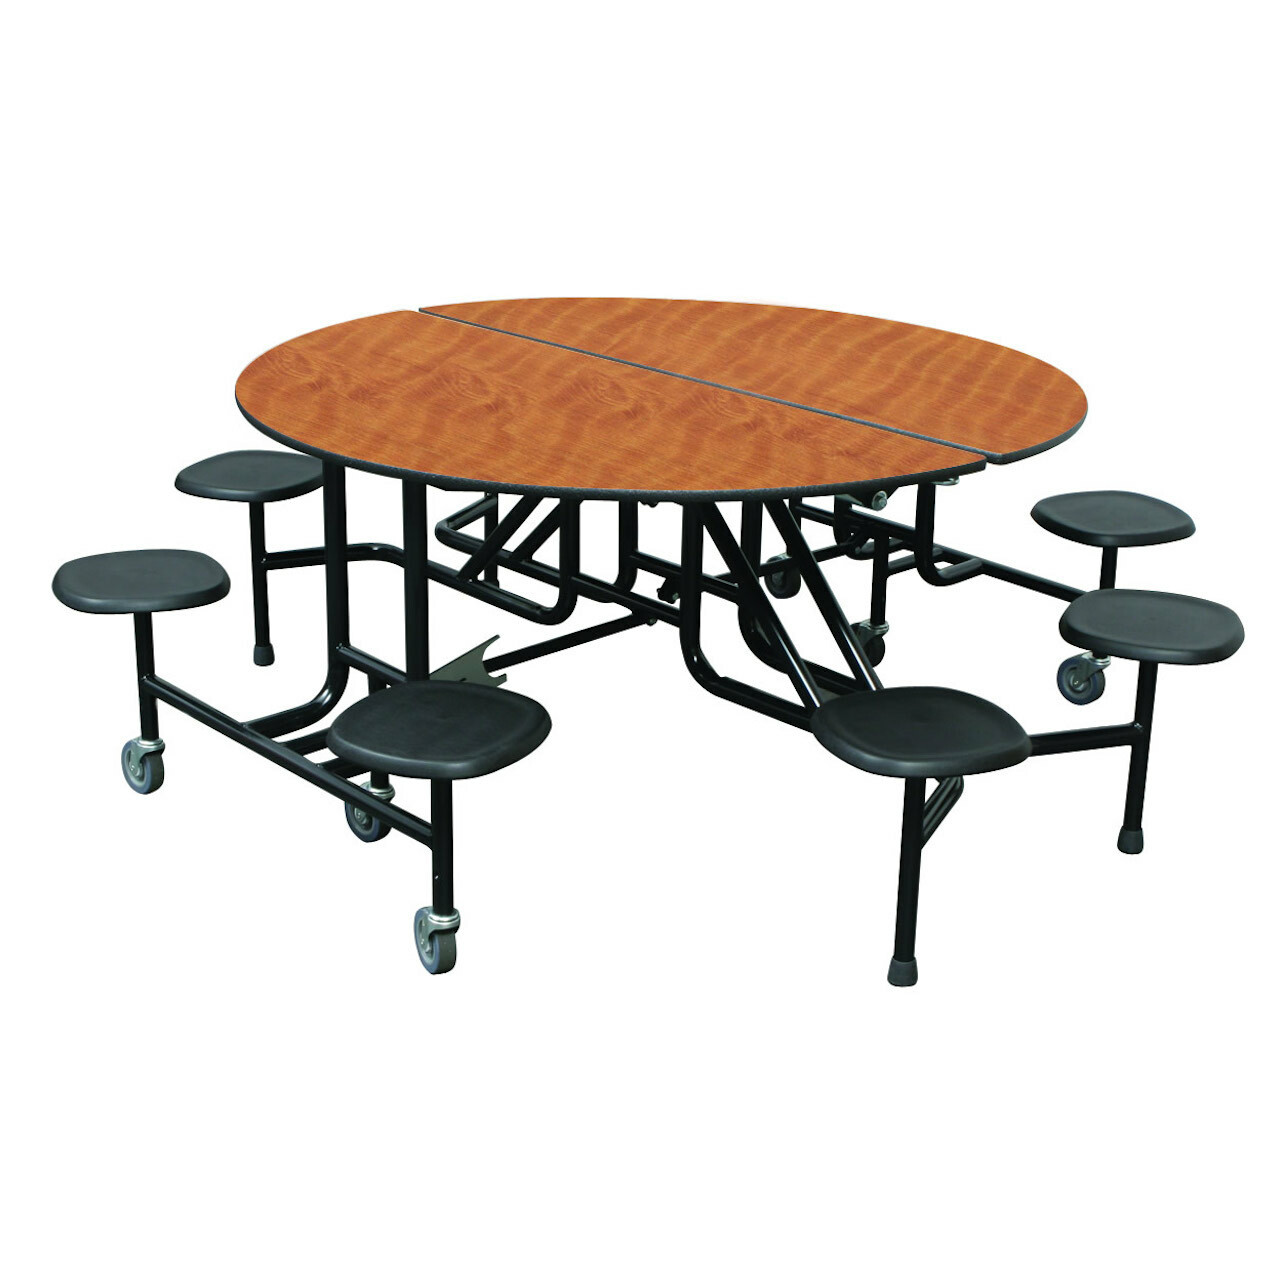 cafeteria-table-6-stools-2-open-wheelchair-spaces/